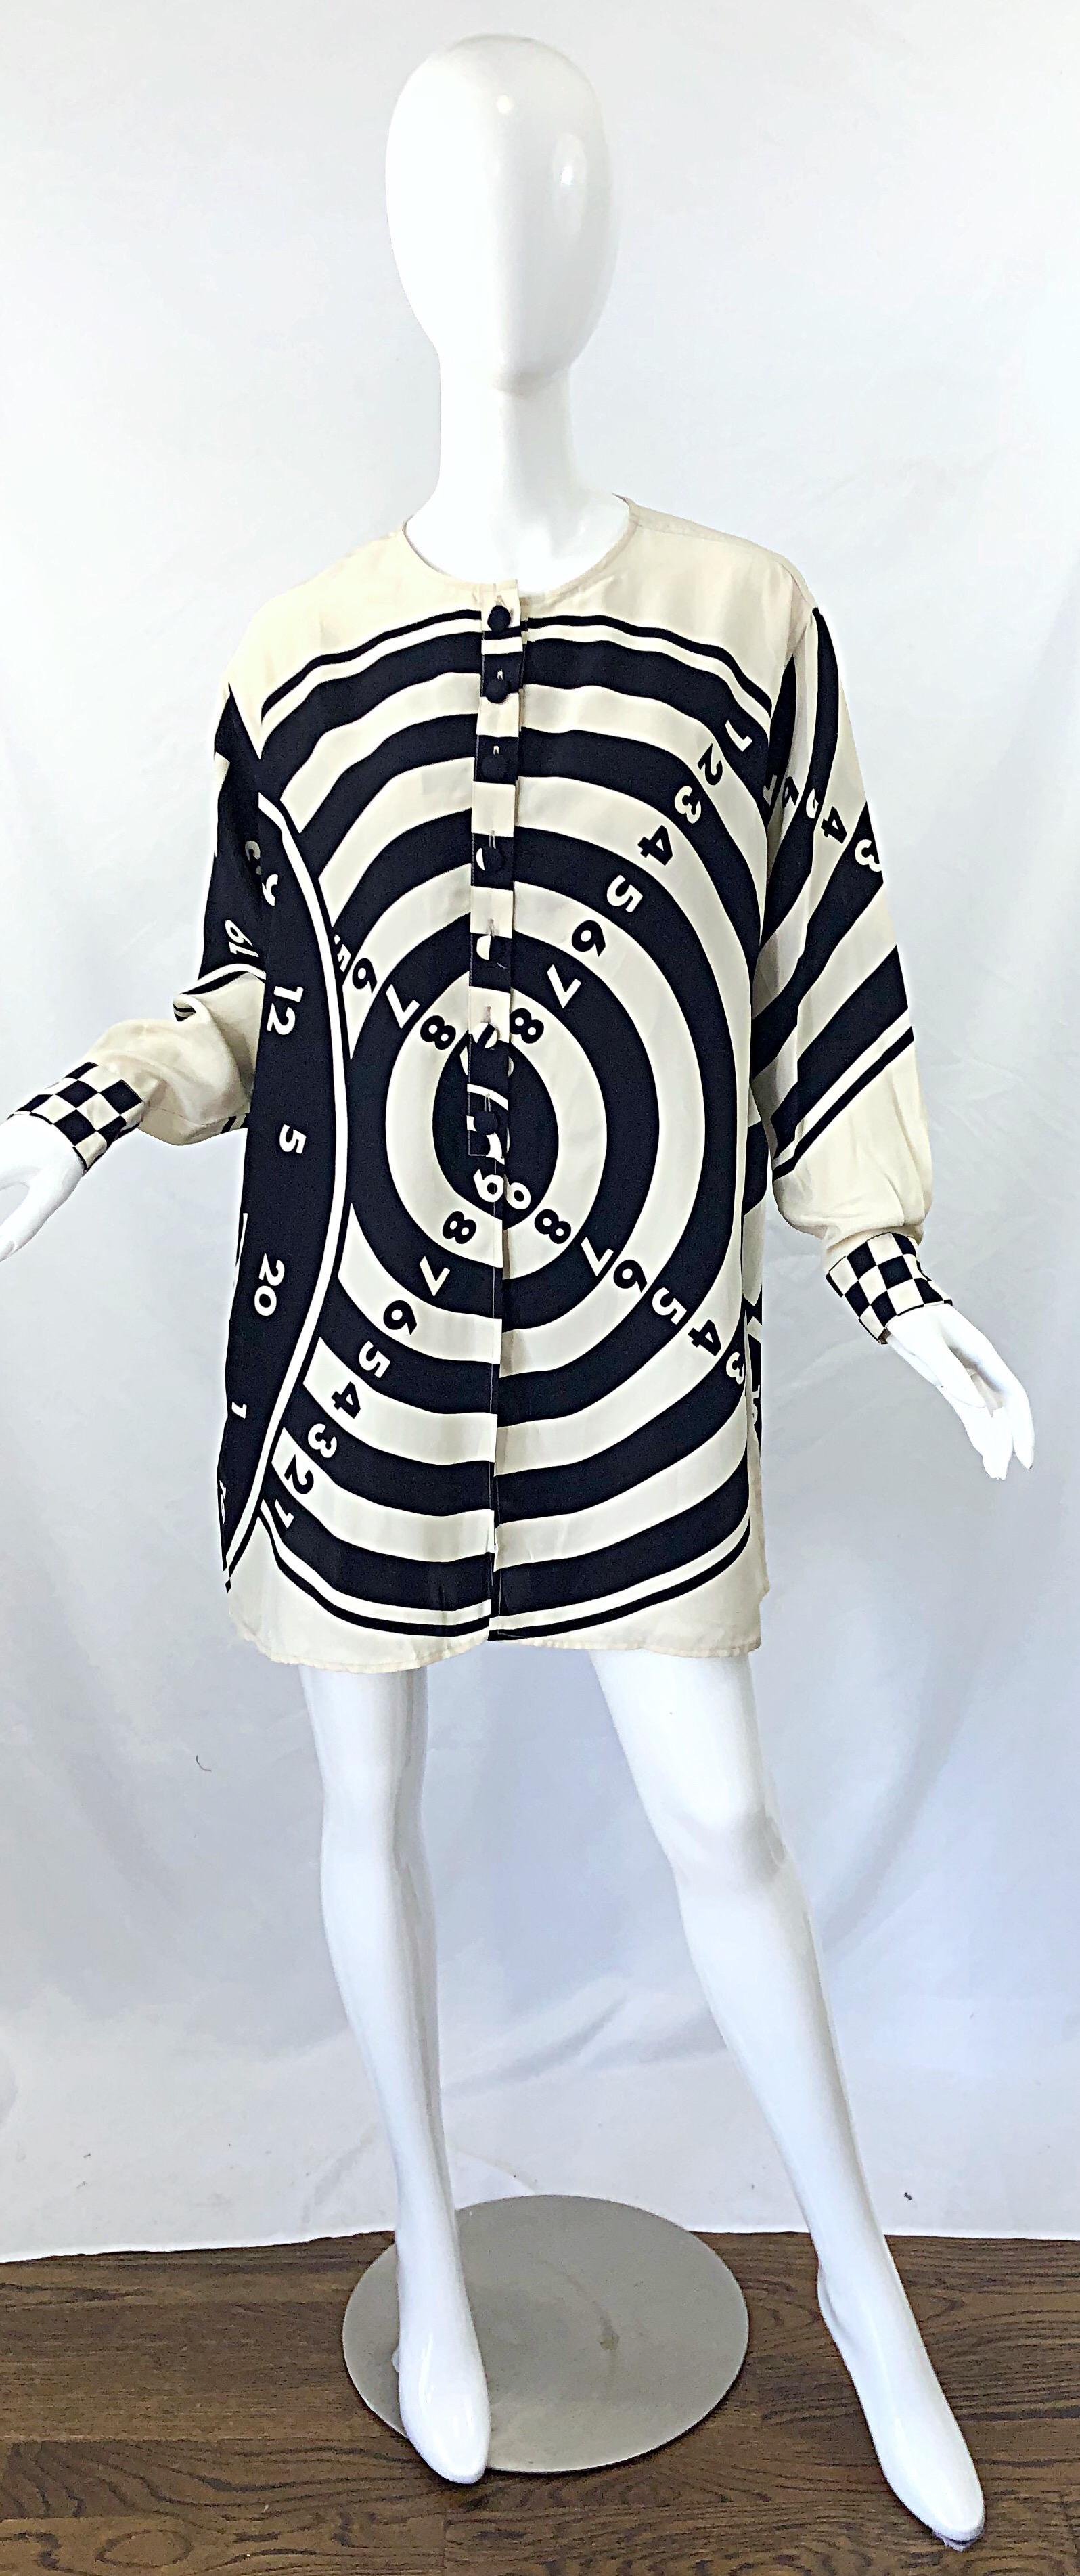 1980s Moschino Cheap & Chic Bullseye Black and White Size 8 Vintage Tunic Dress For Sale 9